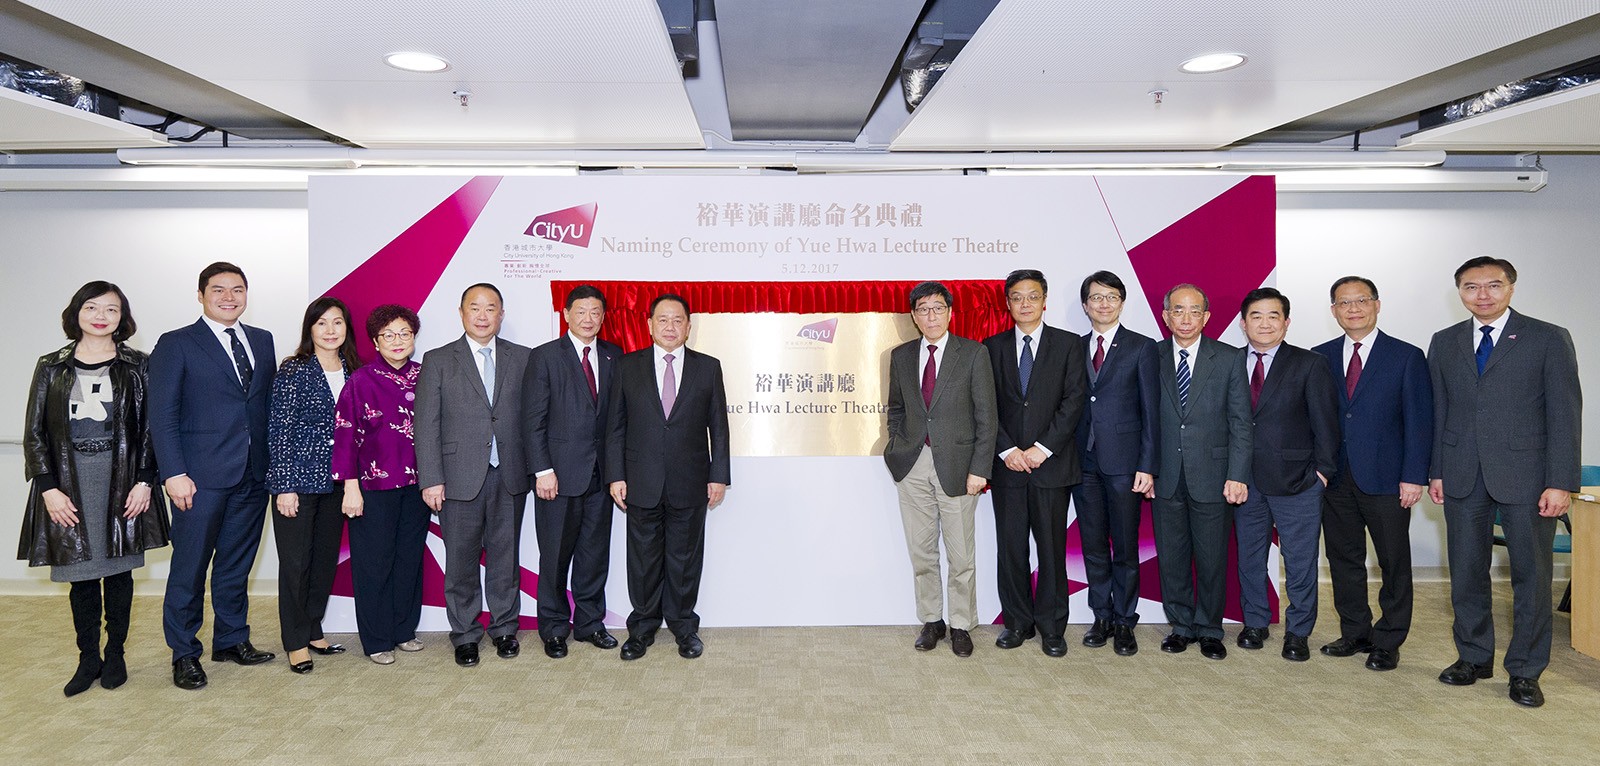 Dr Yu Kwok-chun (7th from left), officiating guests, board members of Yue Hwa and CityU senior management attend the naming ceremony.